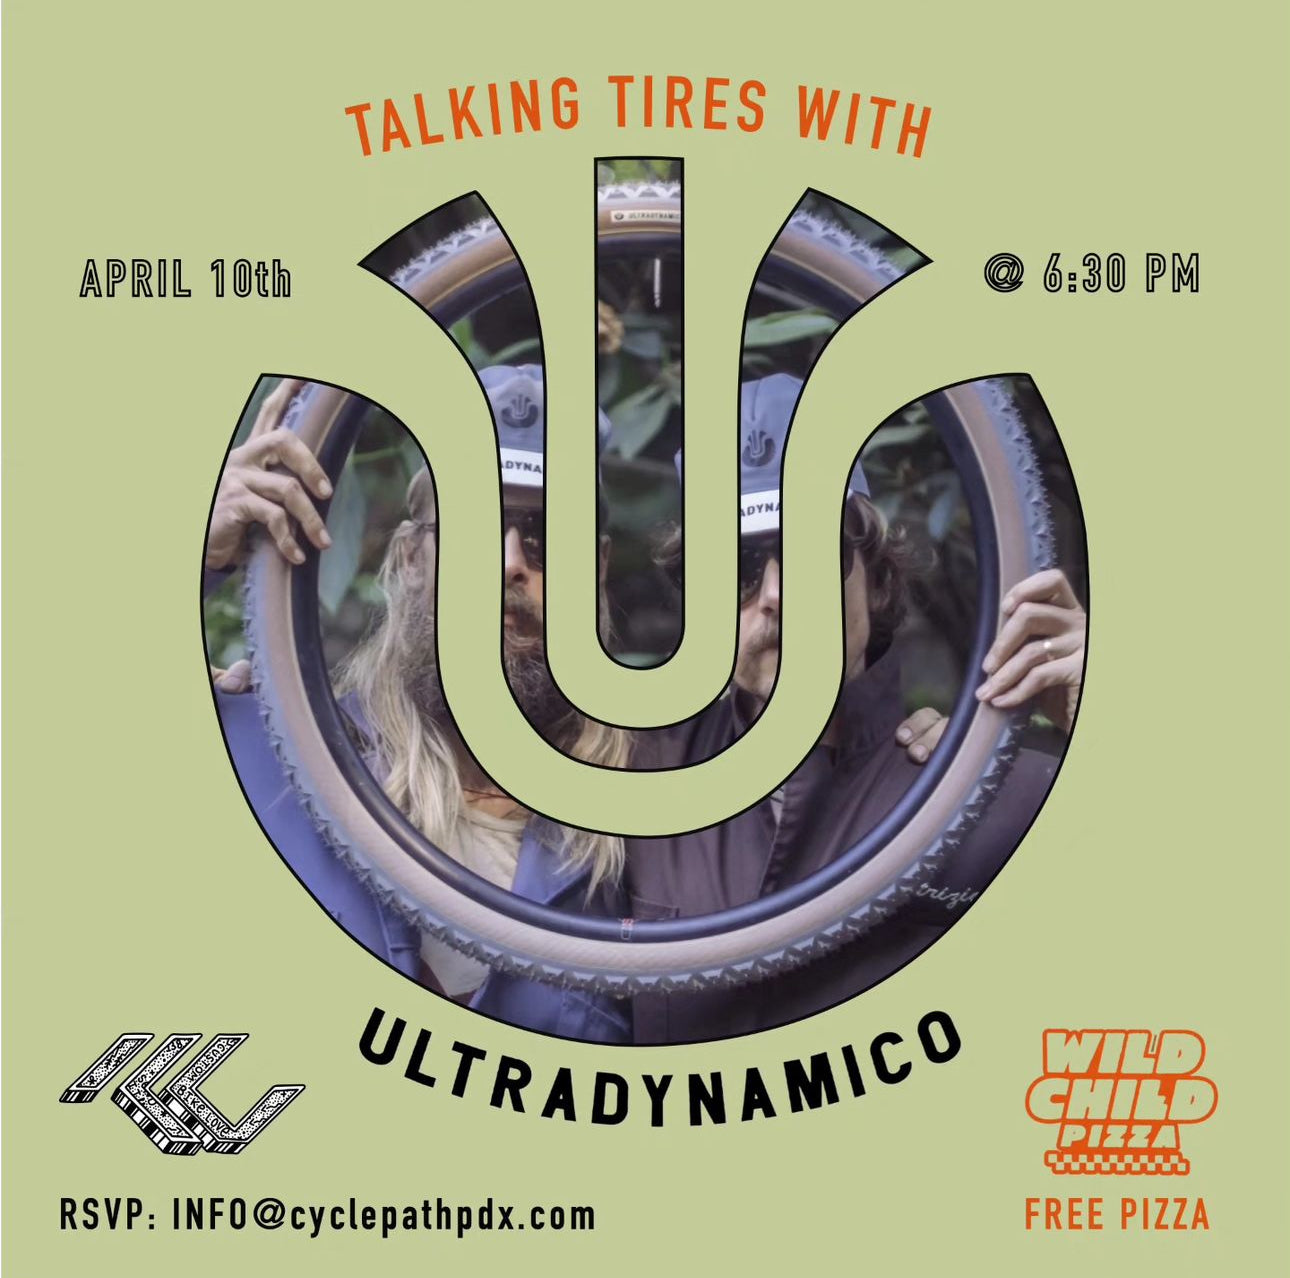 Talking Tires with Ultradynamico